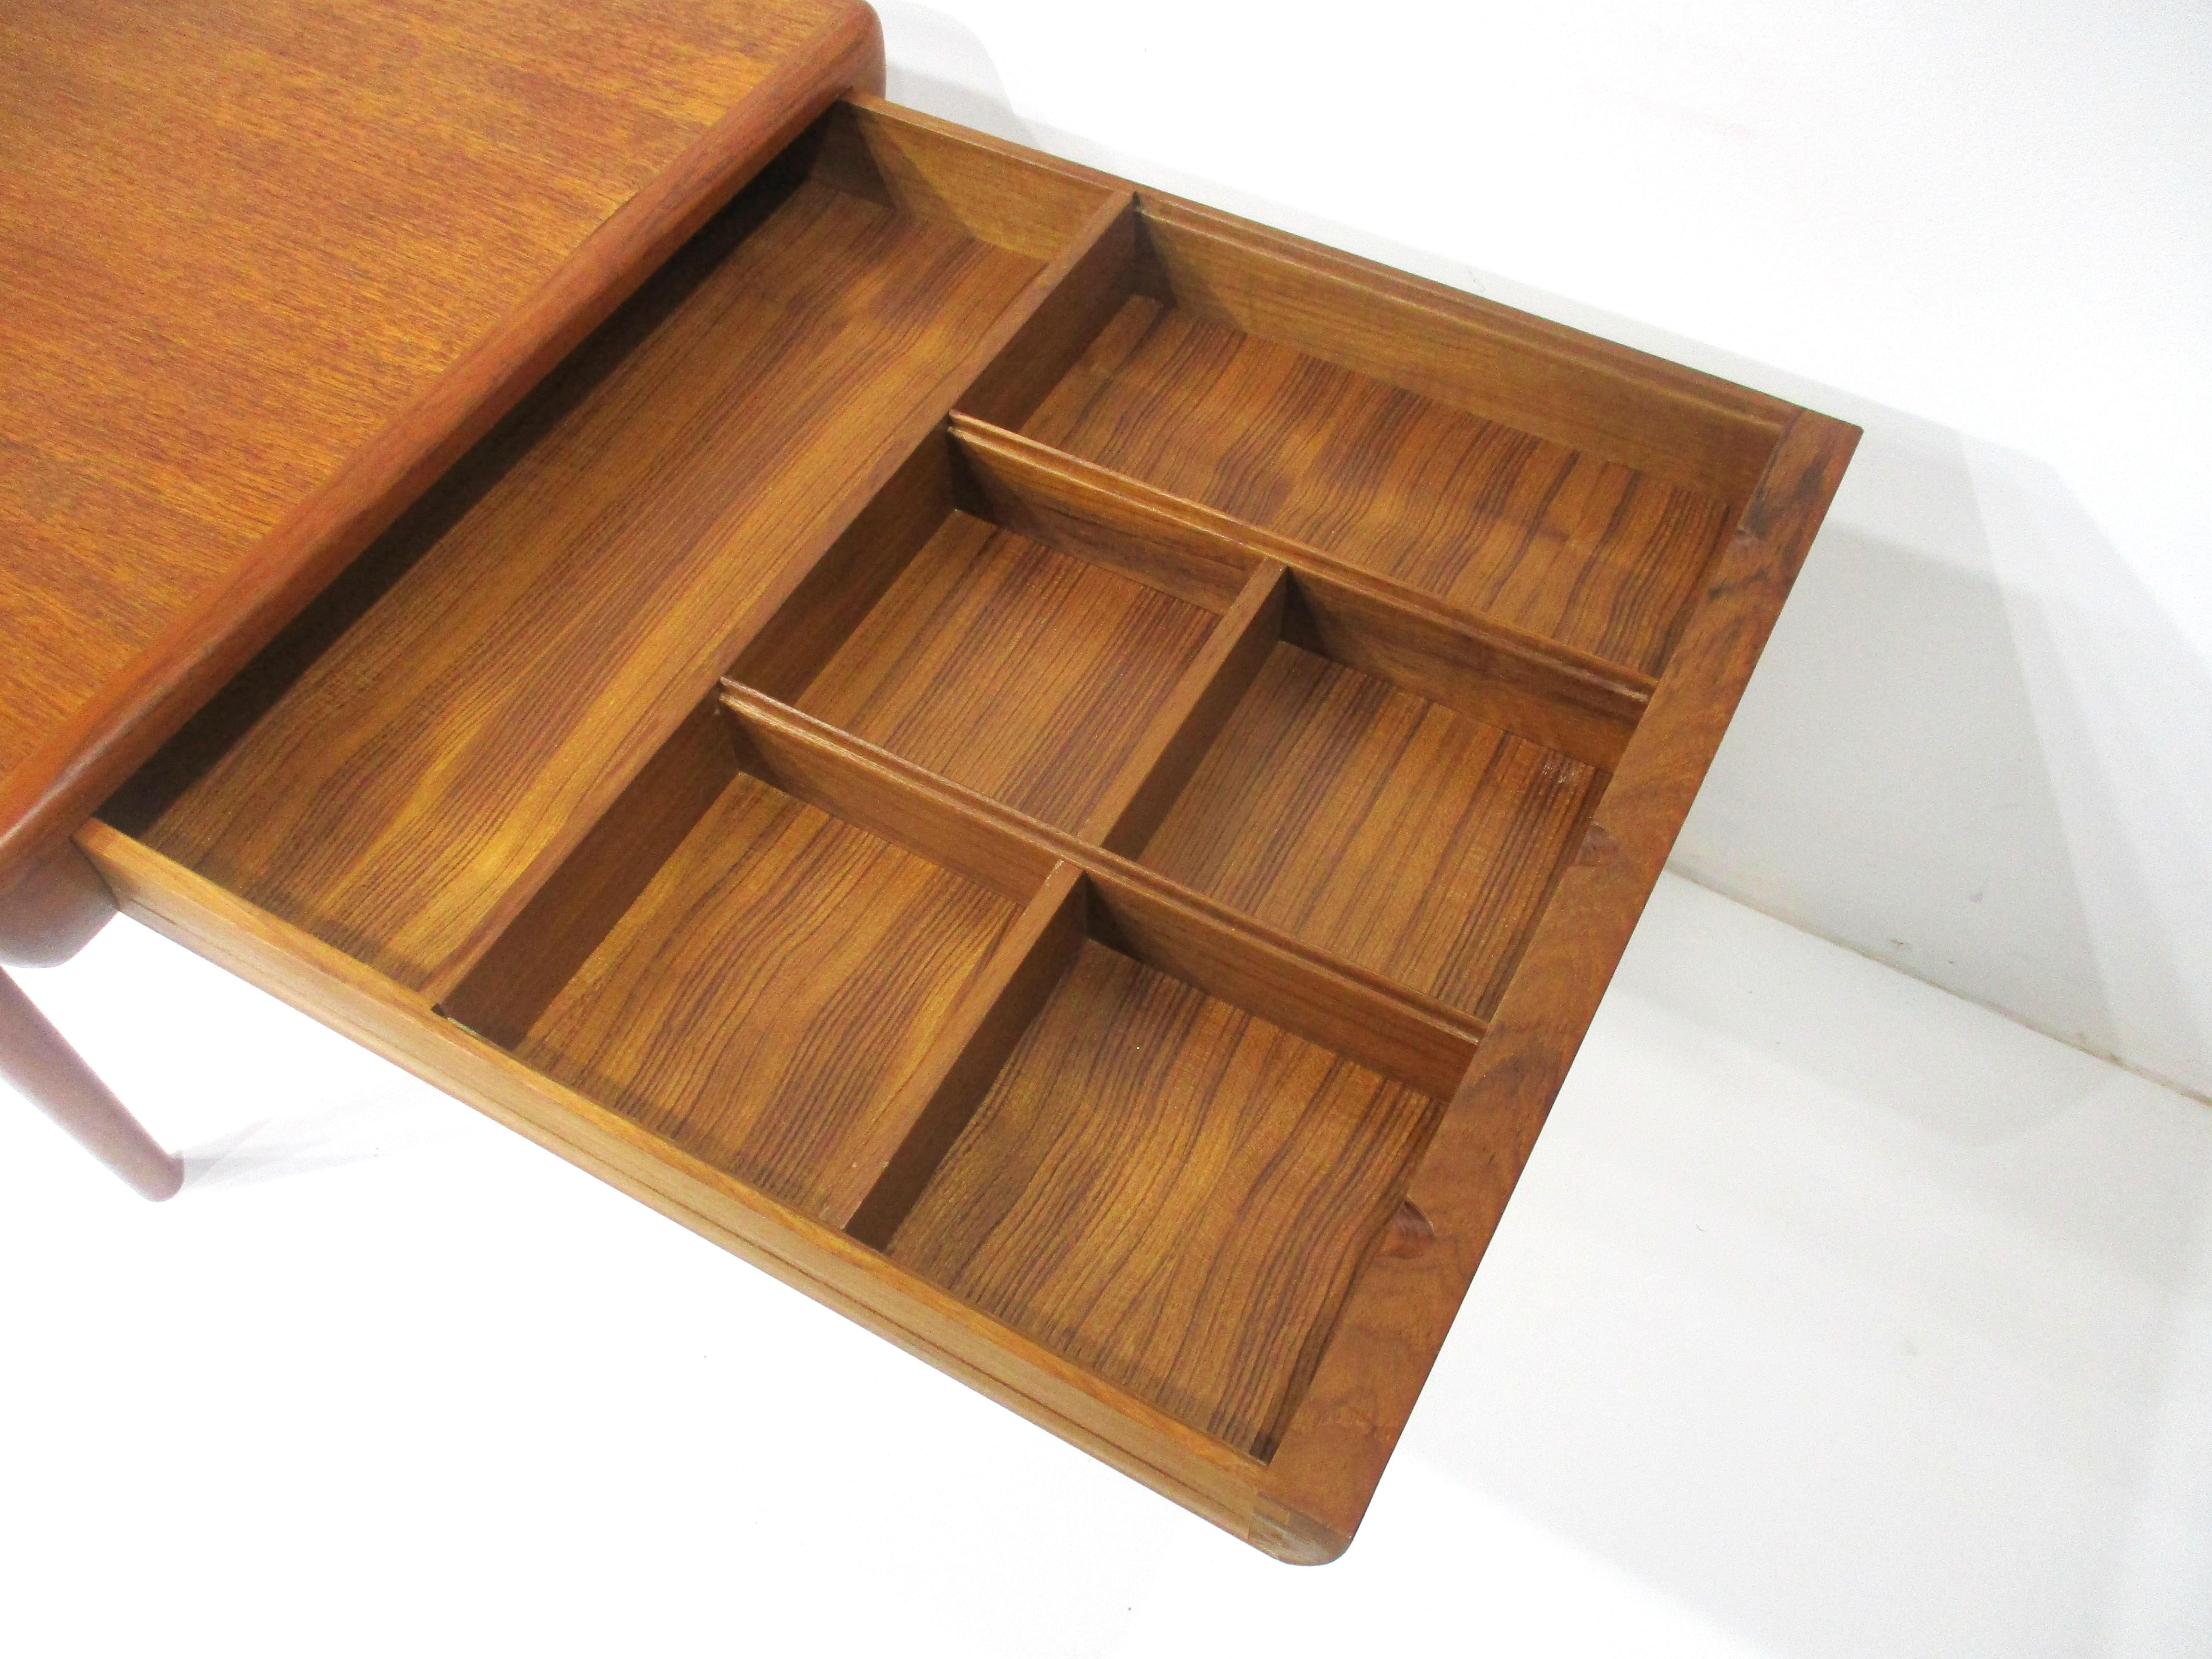 Teak Coffee Table w/ Pull Out Ends by Silkeborg -Johannes Andersen Denmark  4